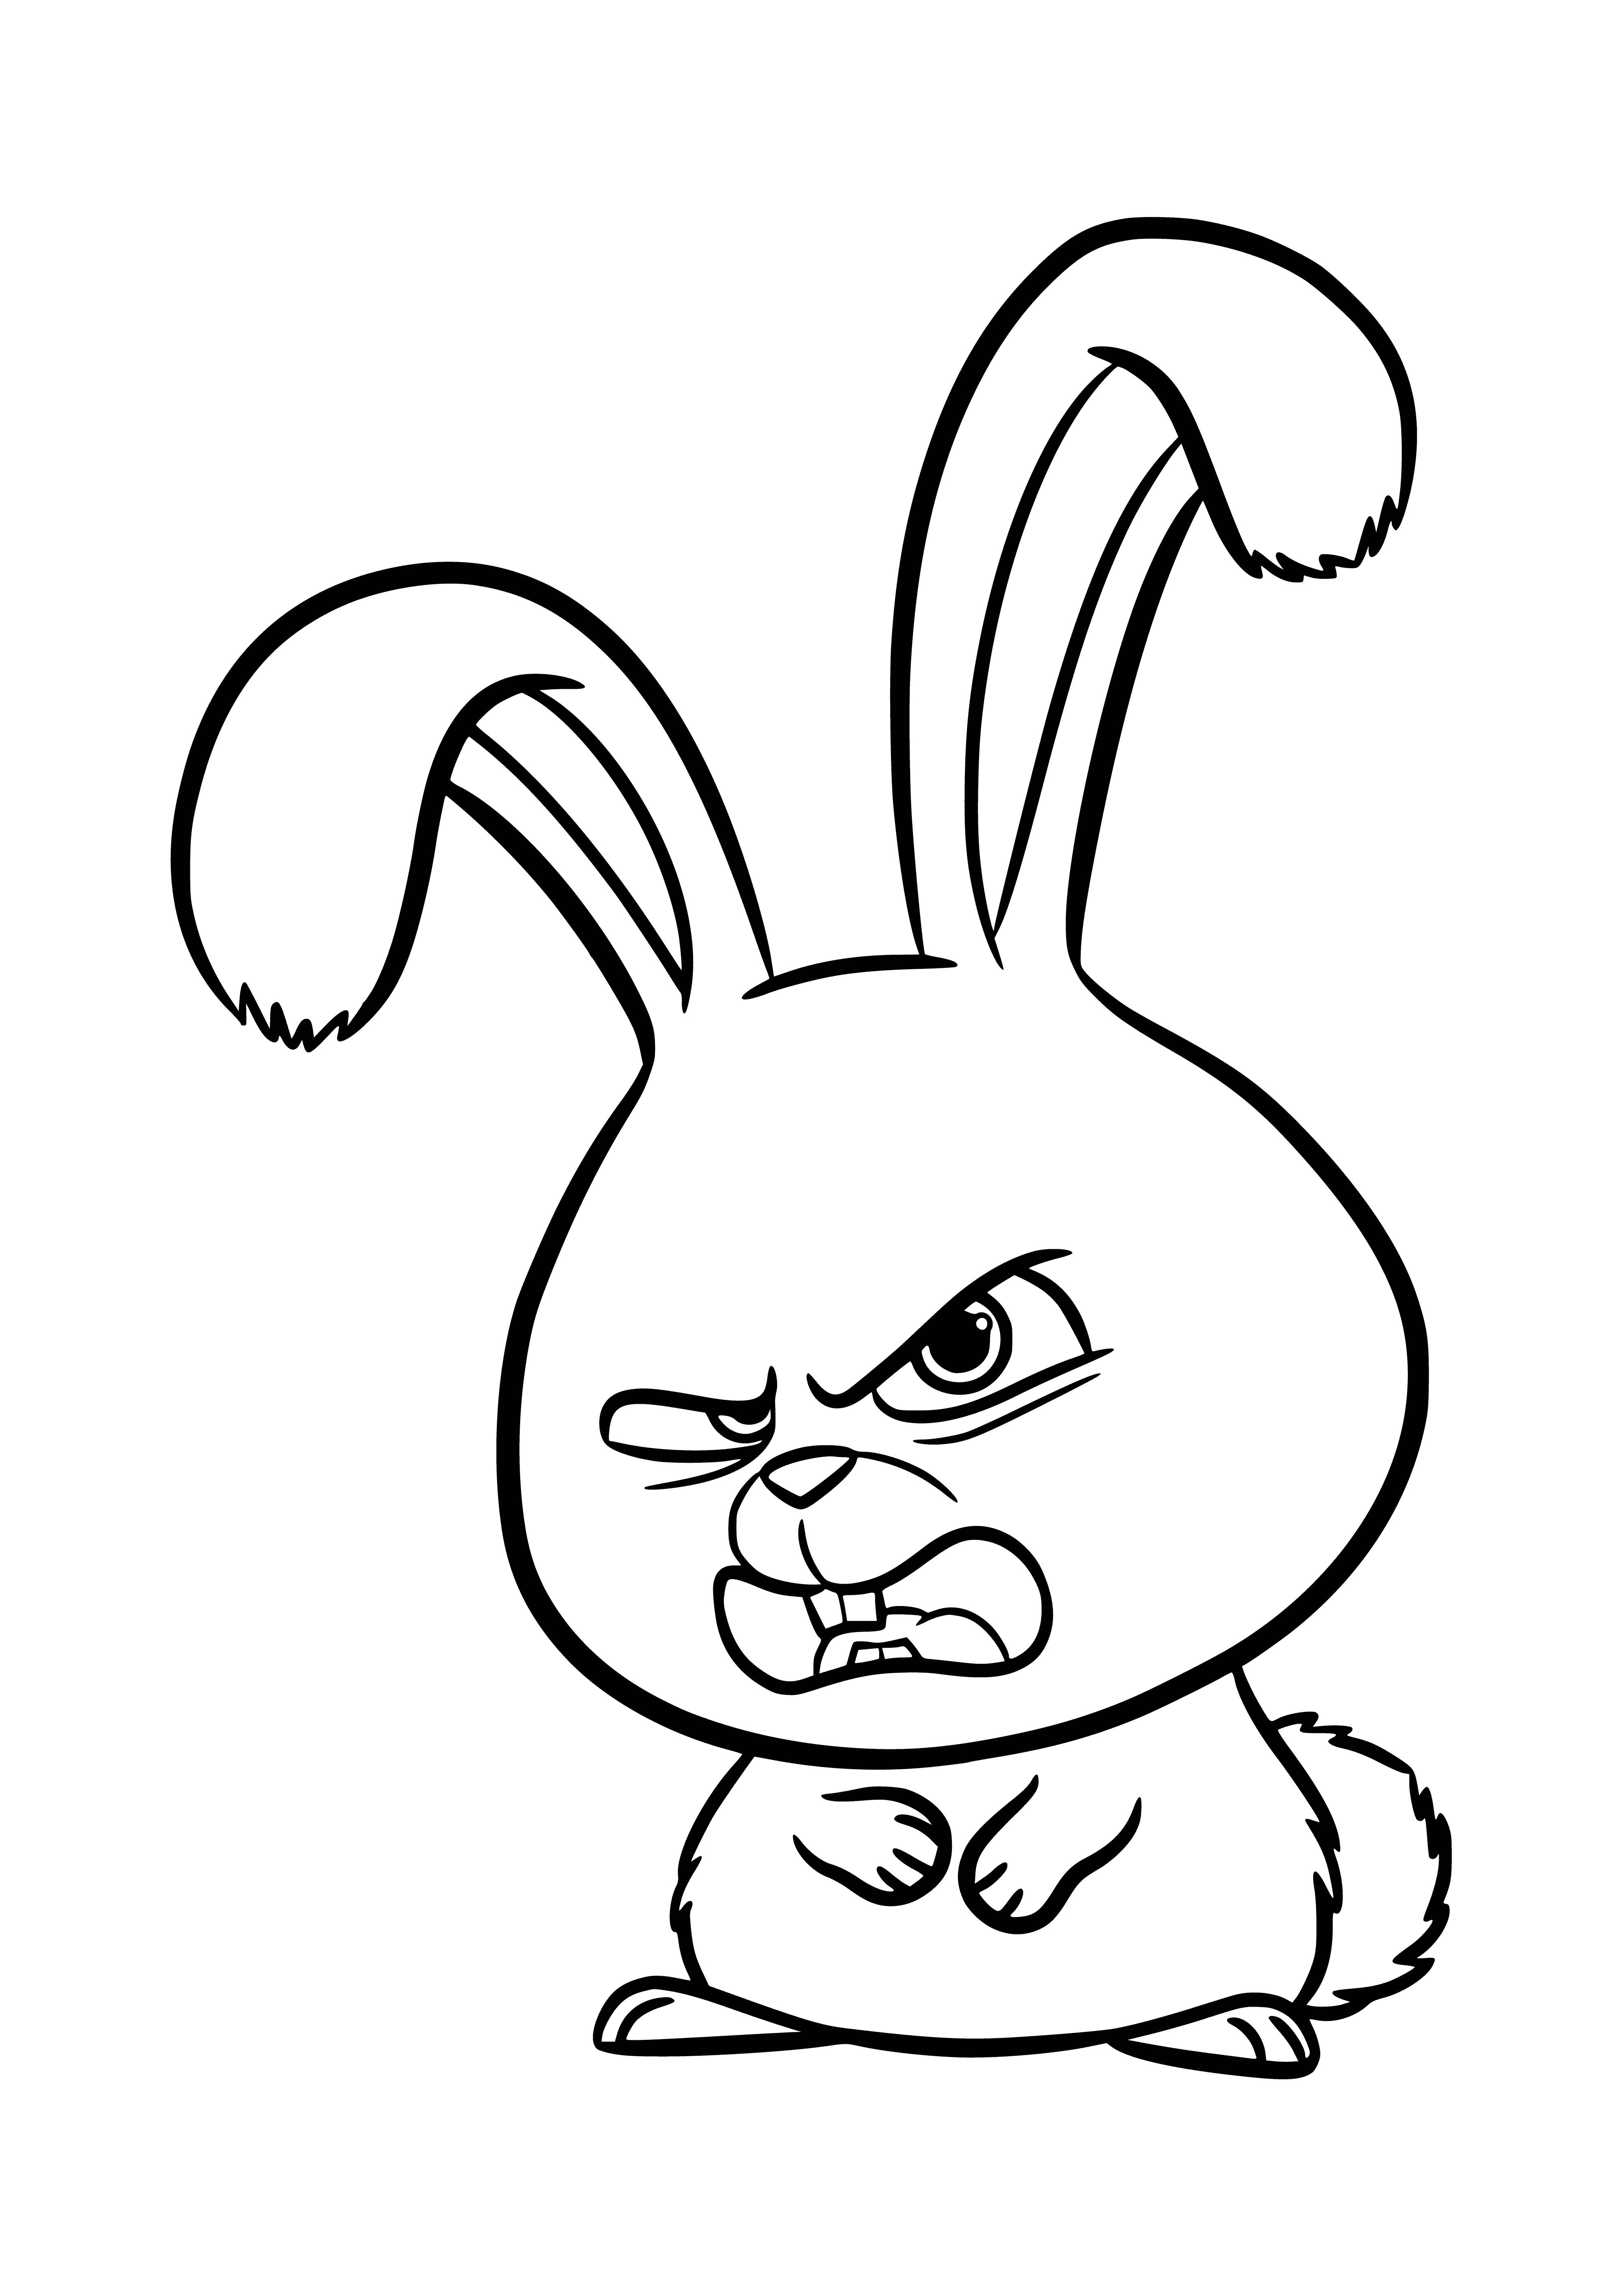 coloring page: Snowball is a white rabbit with blue eyes & leader of the Beast underground. #AdventureTime